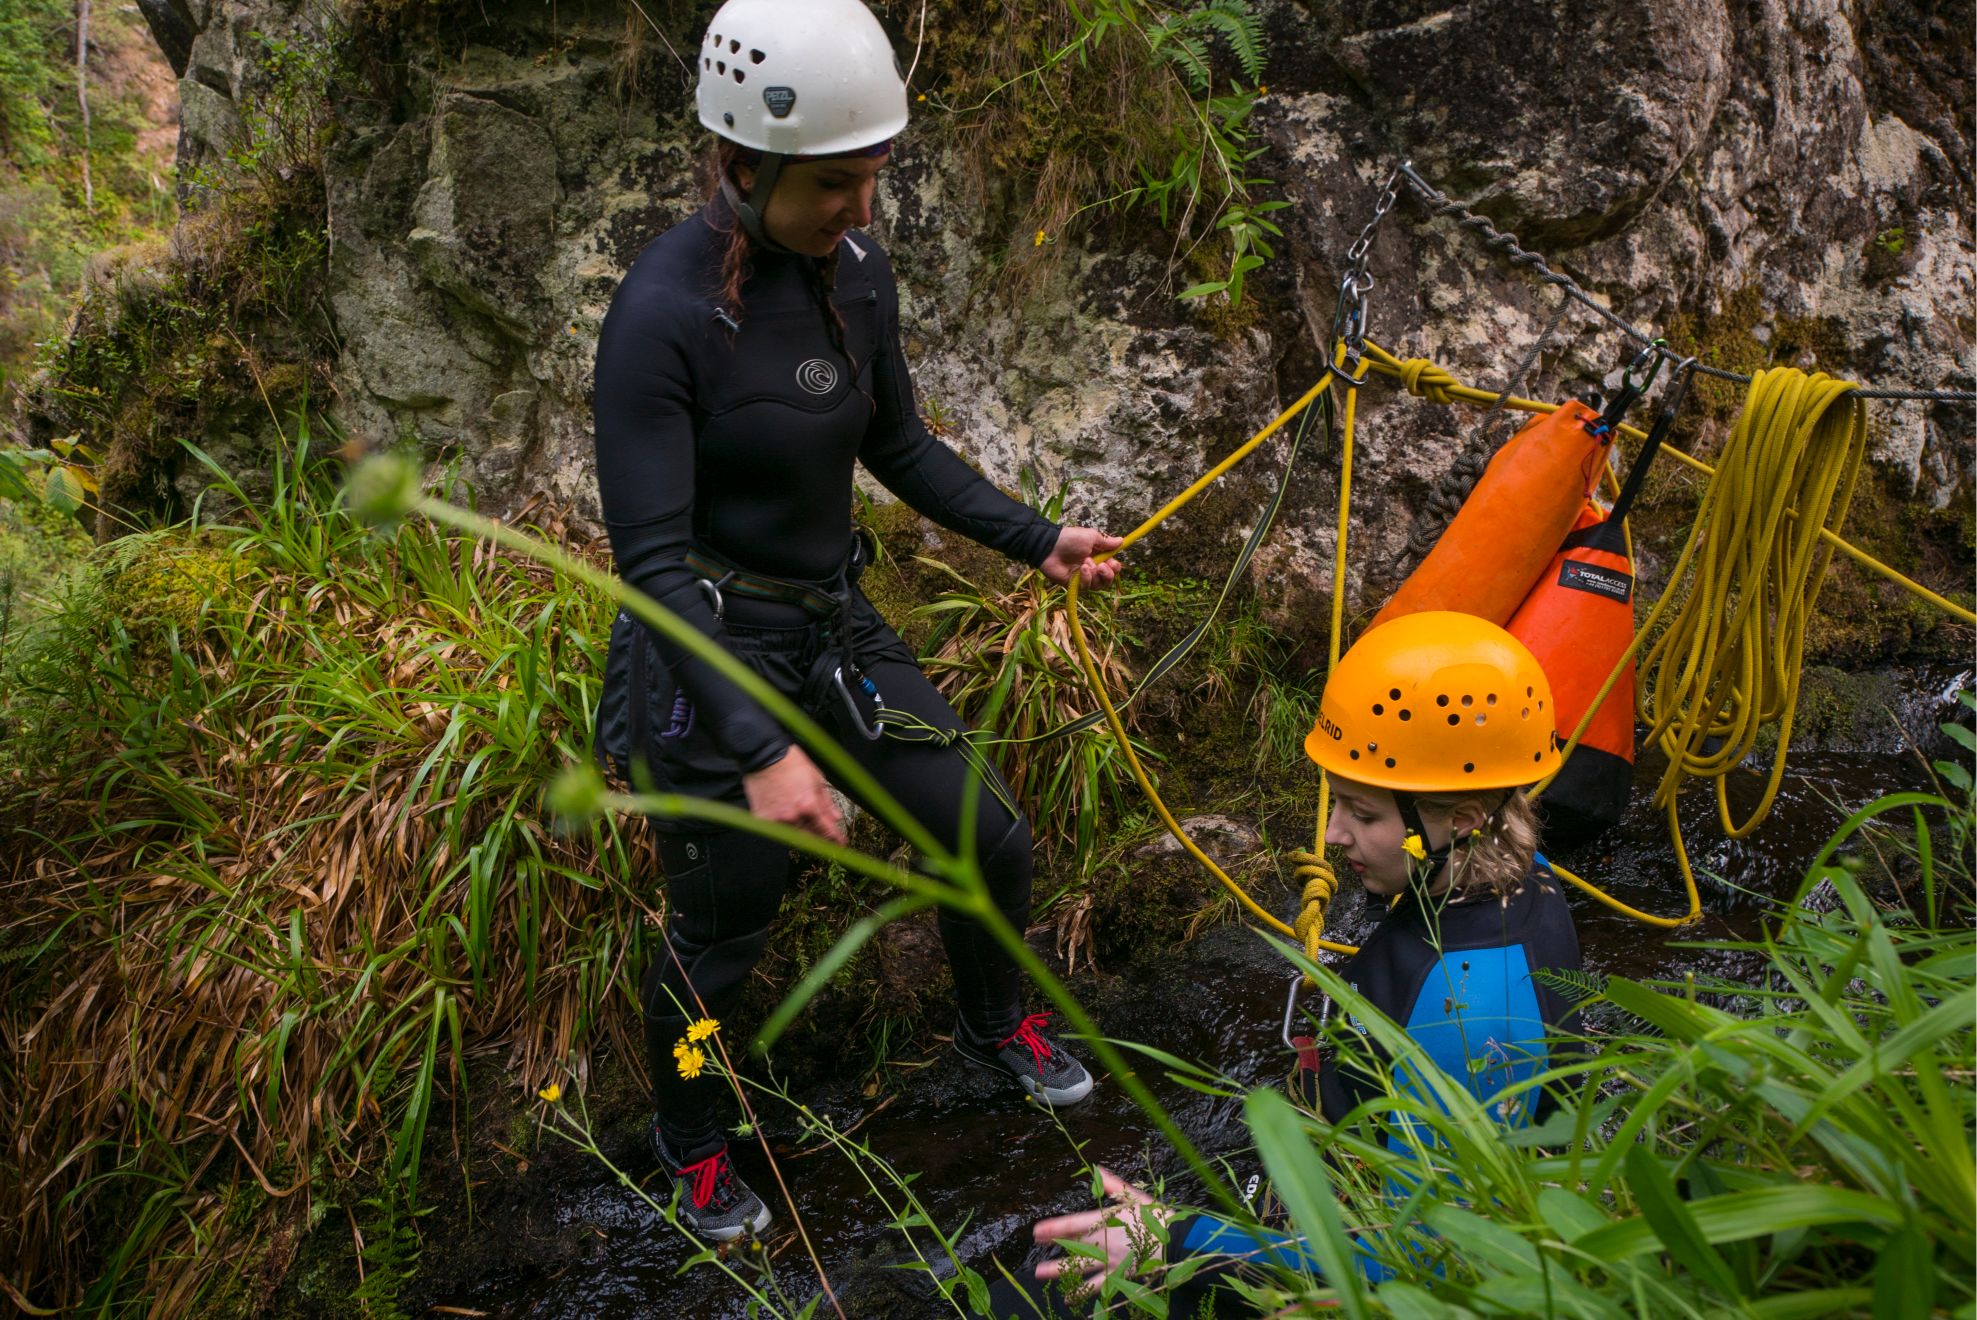 Two people out canyoning, who are roped together.